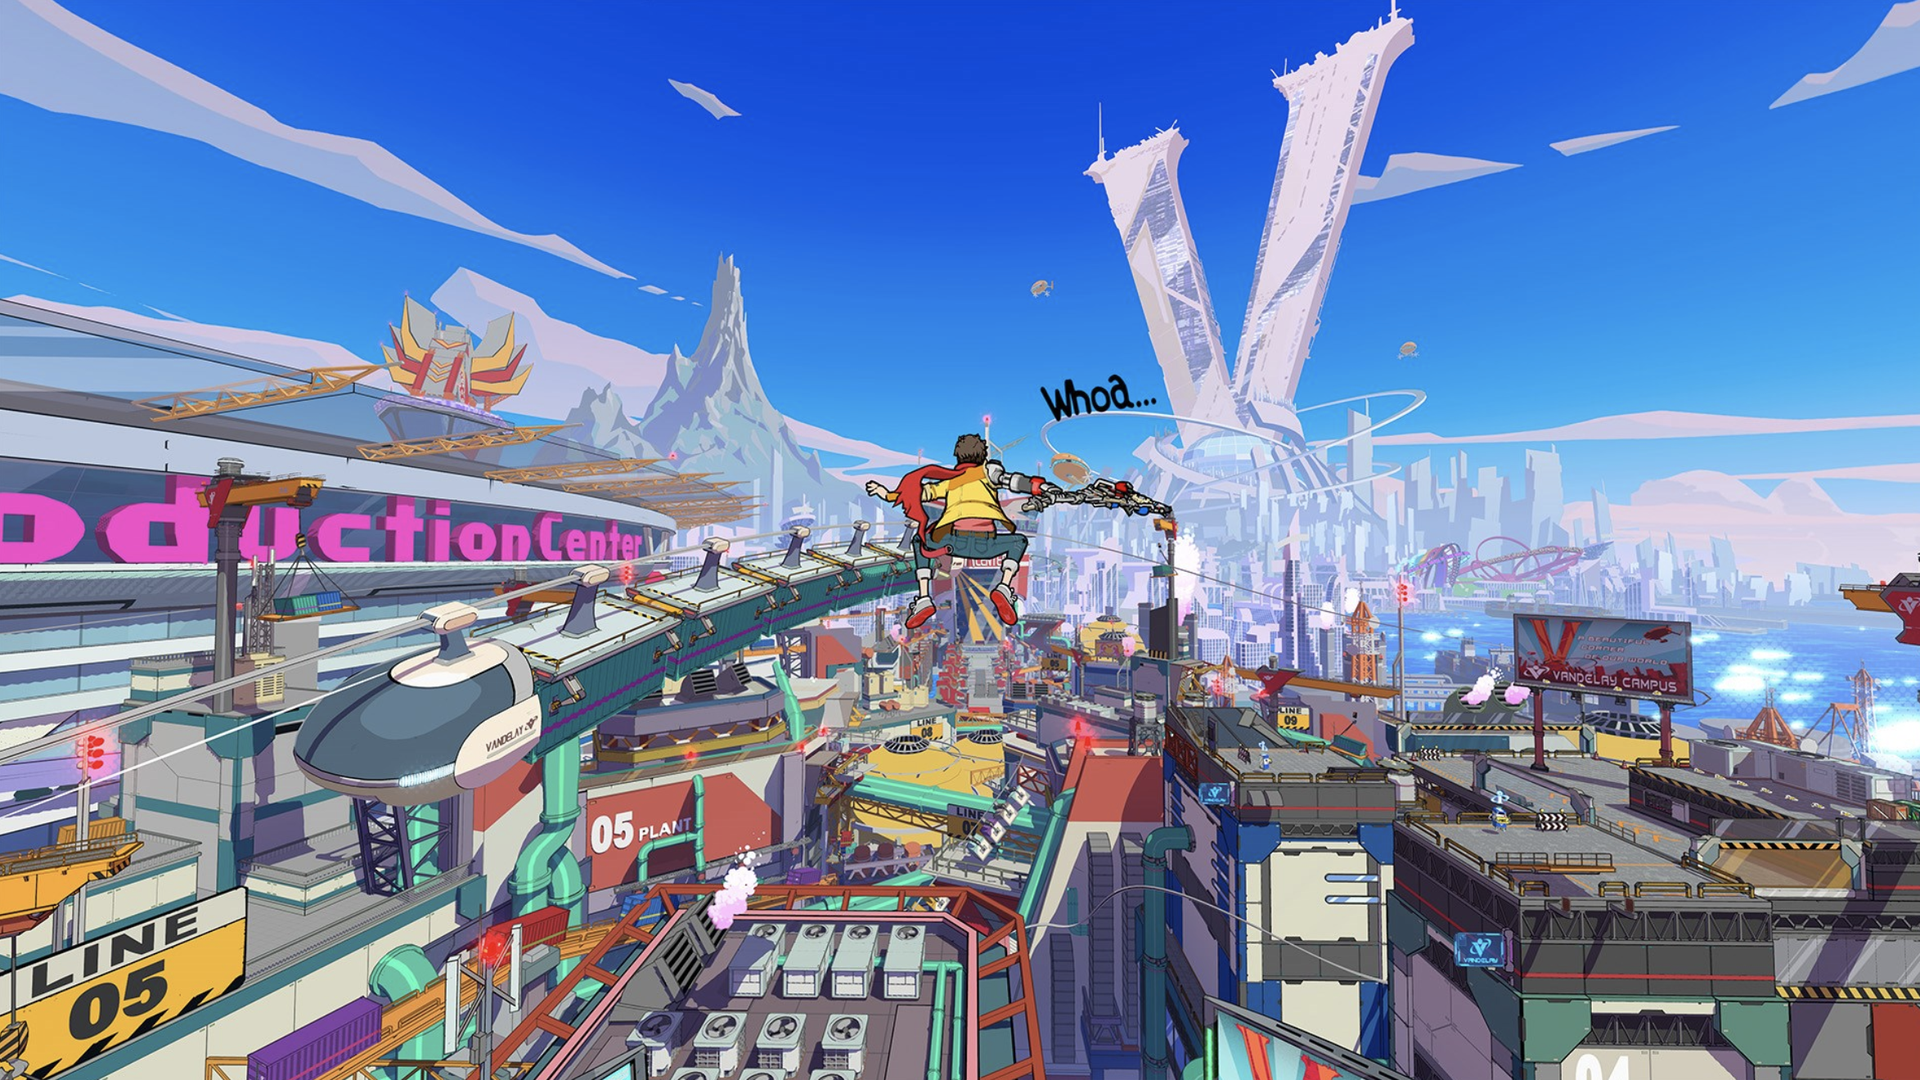 Video game screenshot of a person leaping high above a futuristic city beneath a blue sky